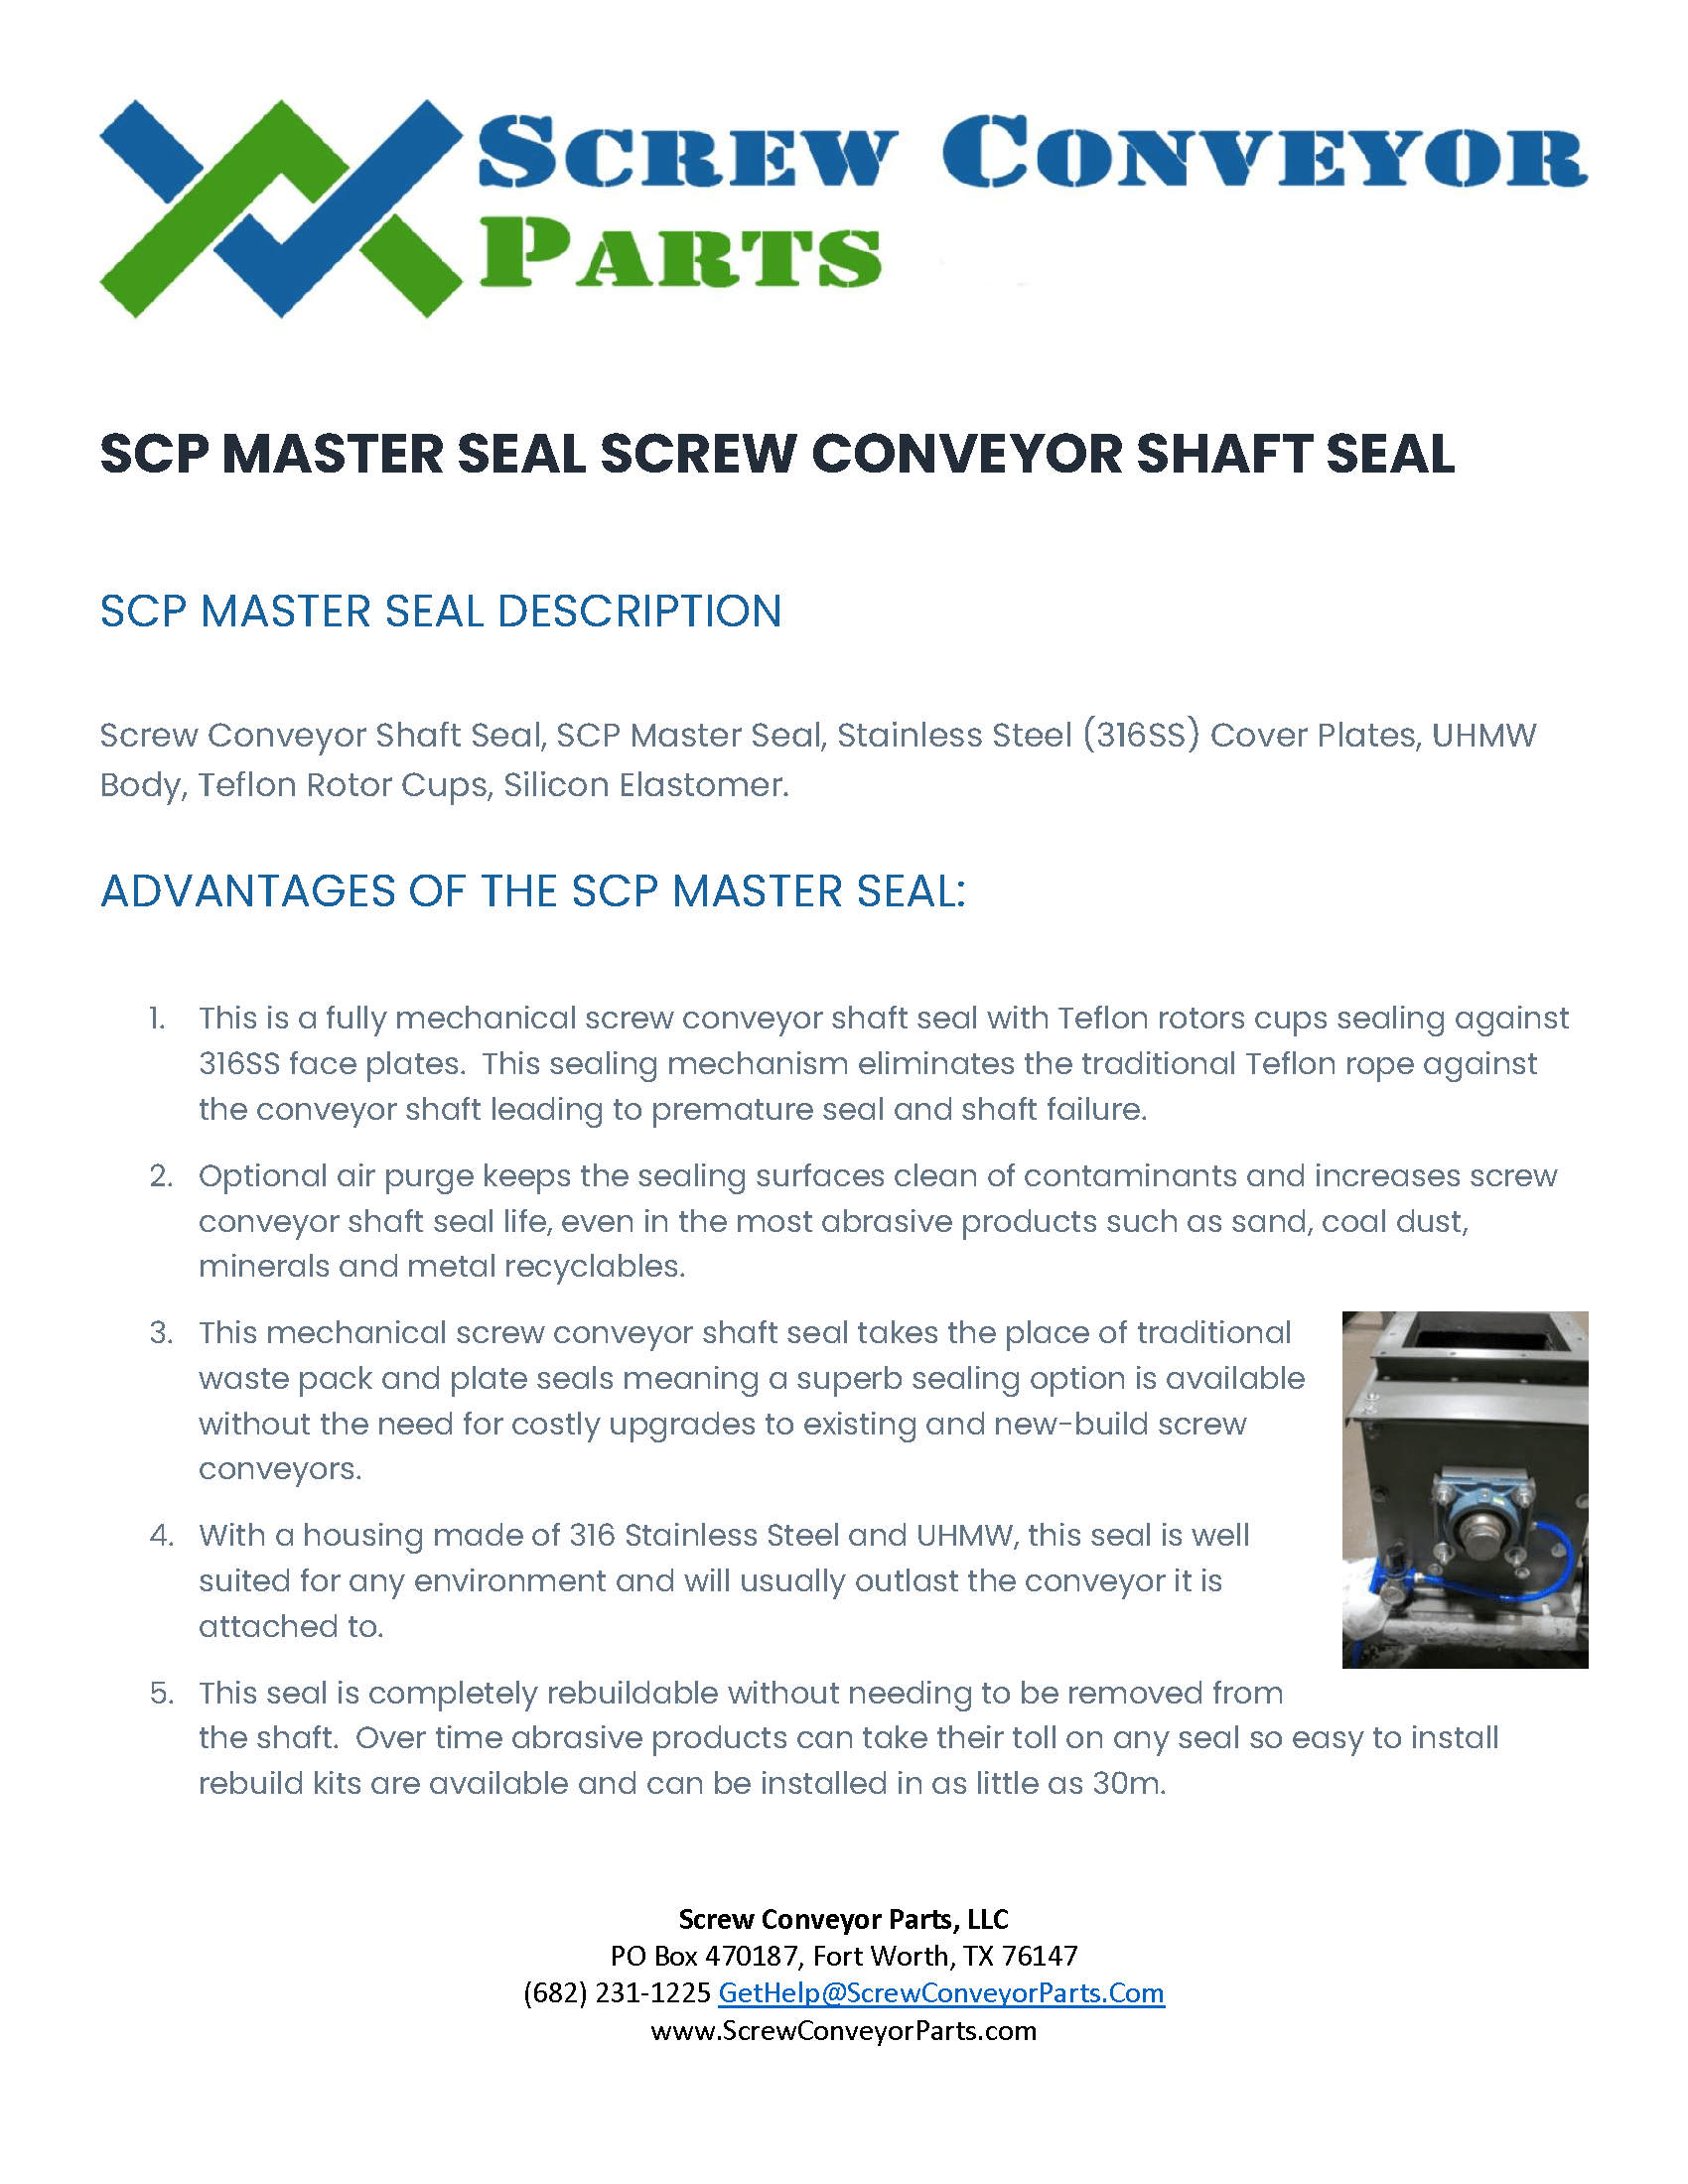 Scp Master Seal Specifications Cover Page - Screw Conveyor Parts